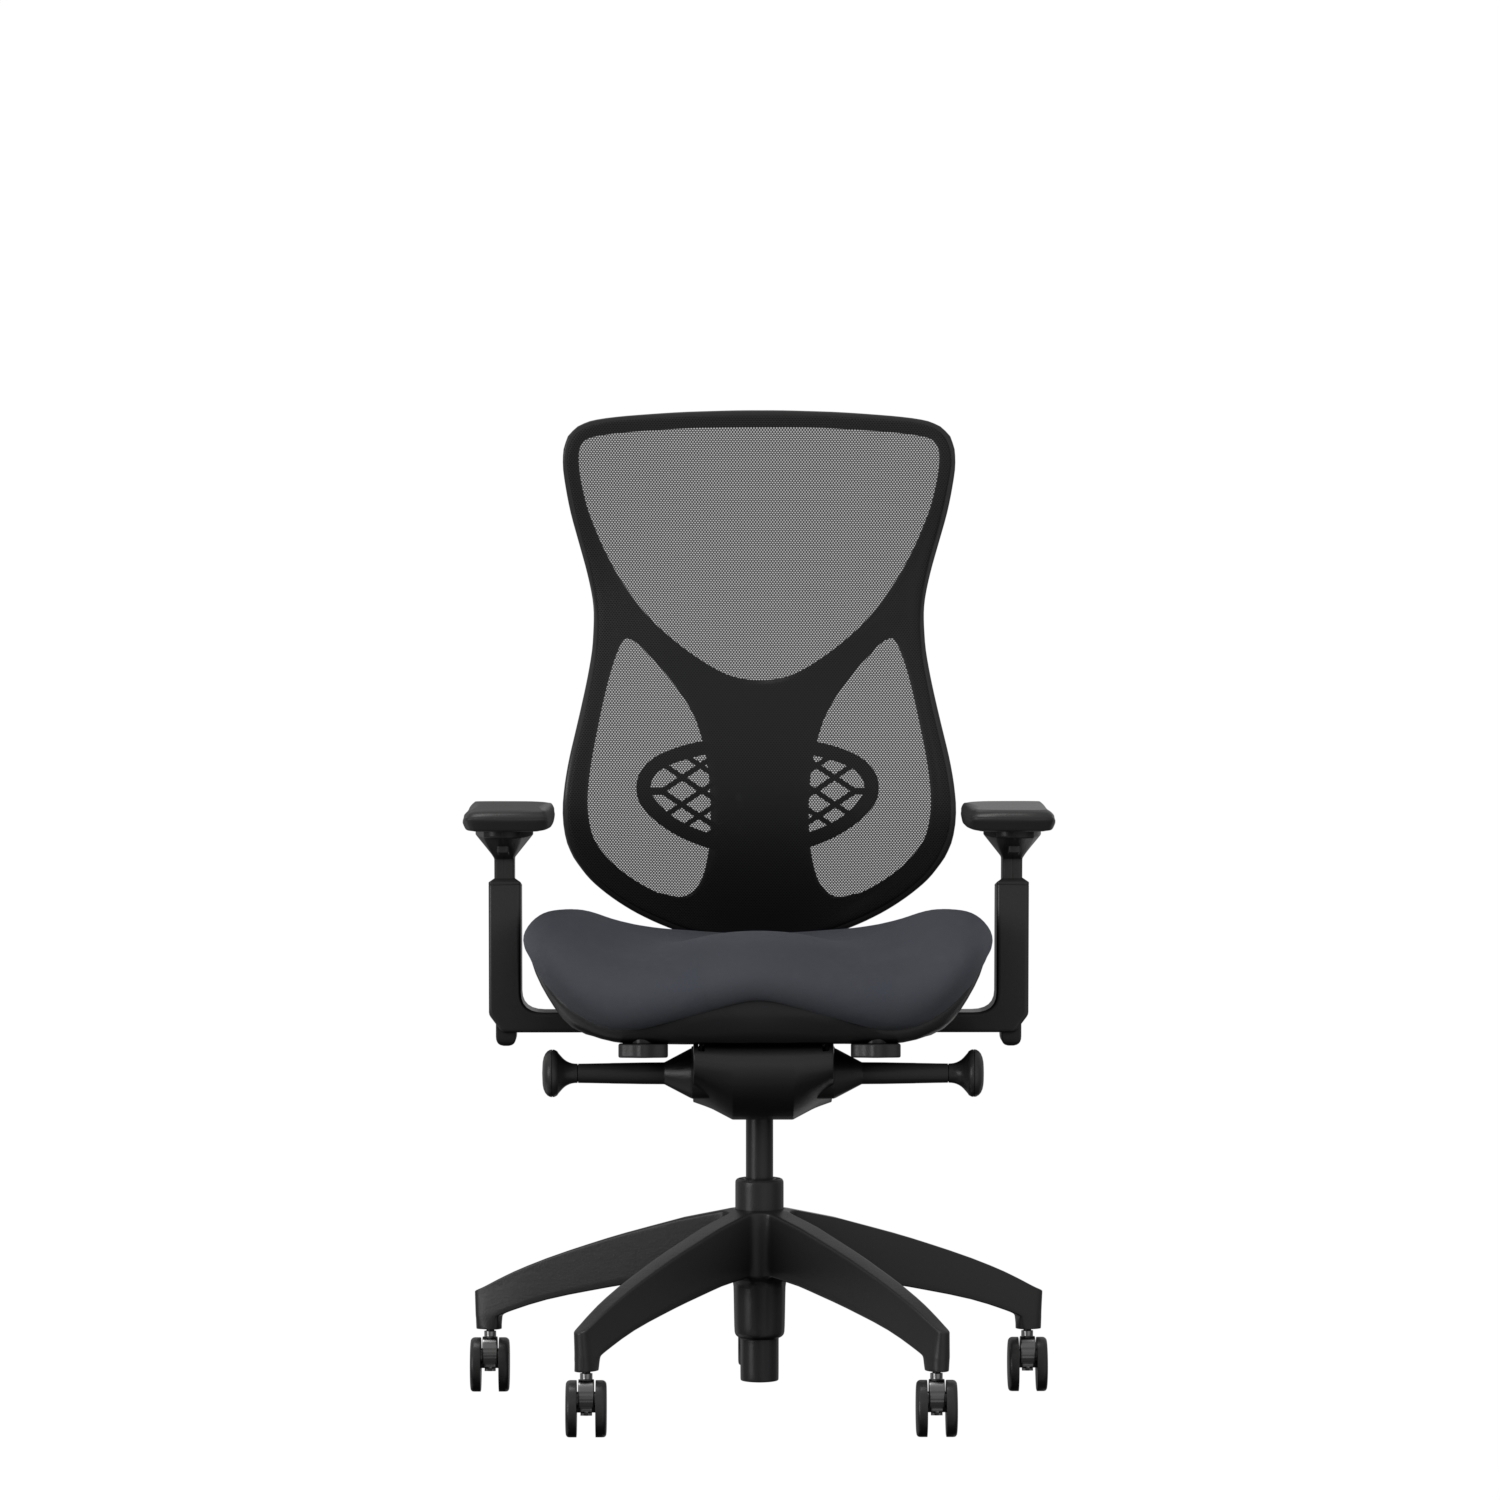 Midcelli 2800 – Home Office Chair